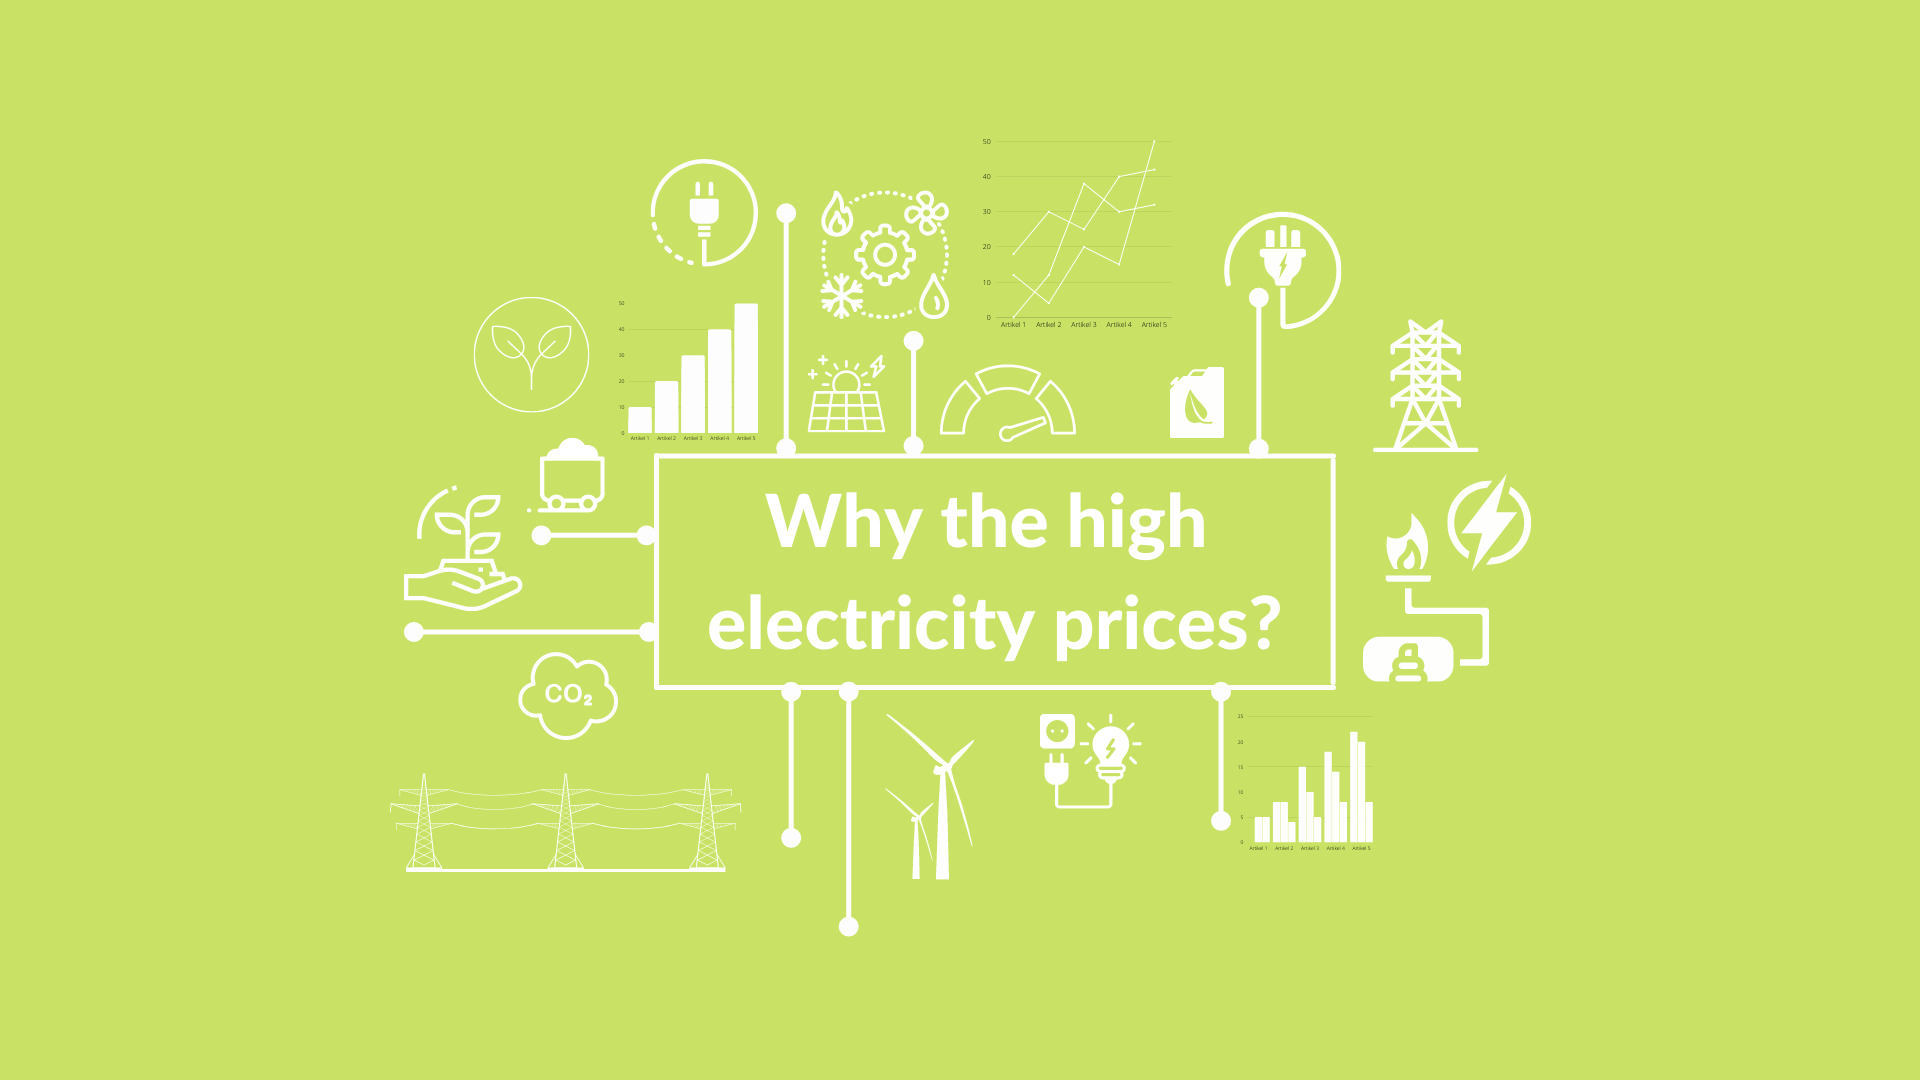 Why the high electricity prices? – Myrspoven explains why